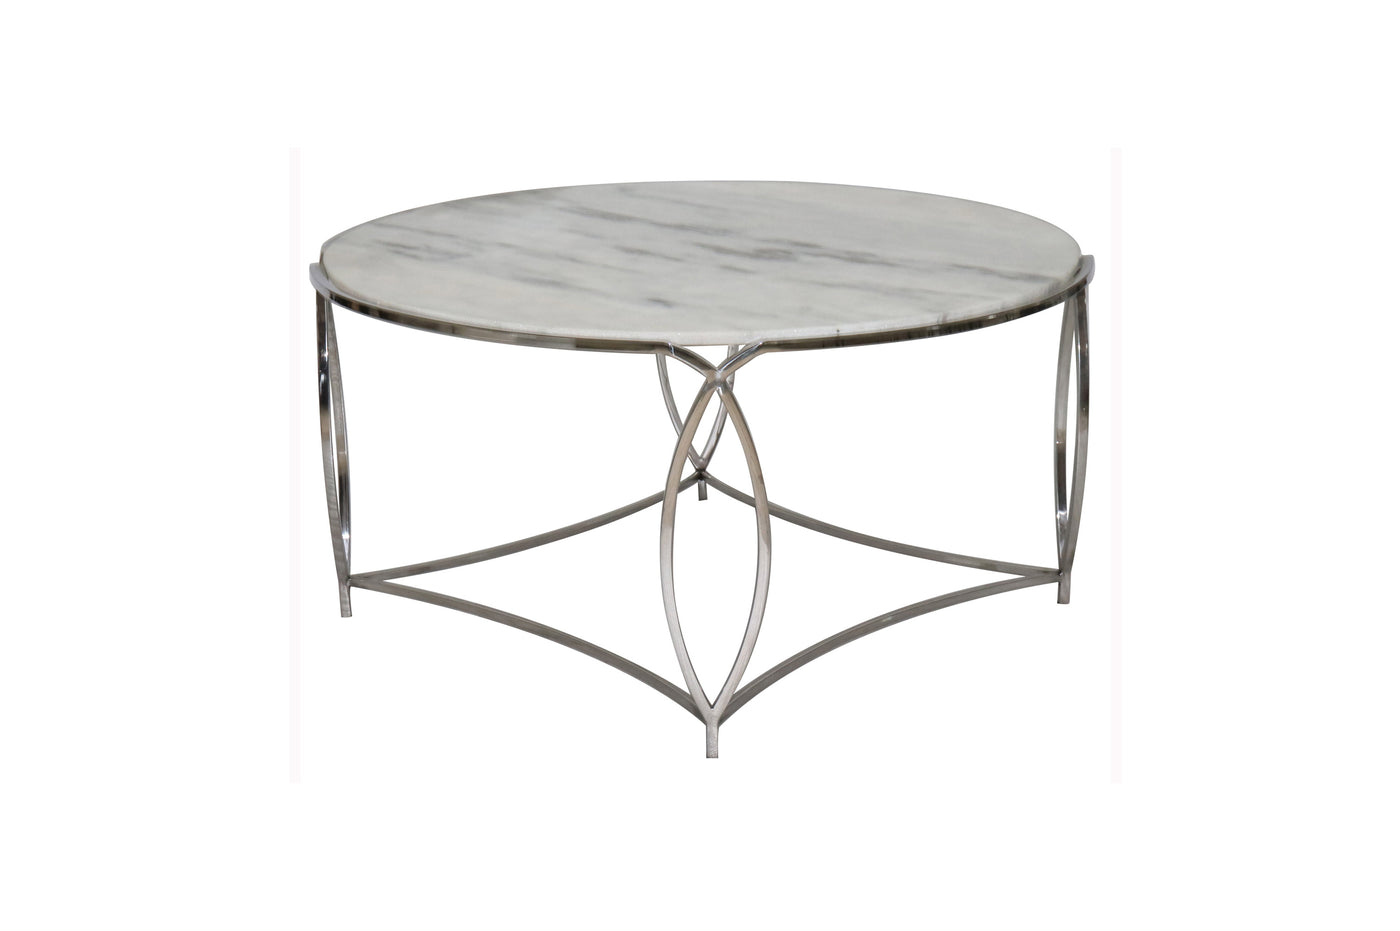 Maggie Round Marble End Table Hoya Casa Hoyacasa.ca couch sofa bed 4 seater sectional table kitchen table love seat sofa bed matress Toronto Canada manufactures home decoration frames indoor Ottoman sale